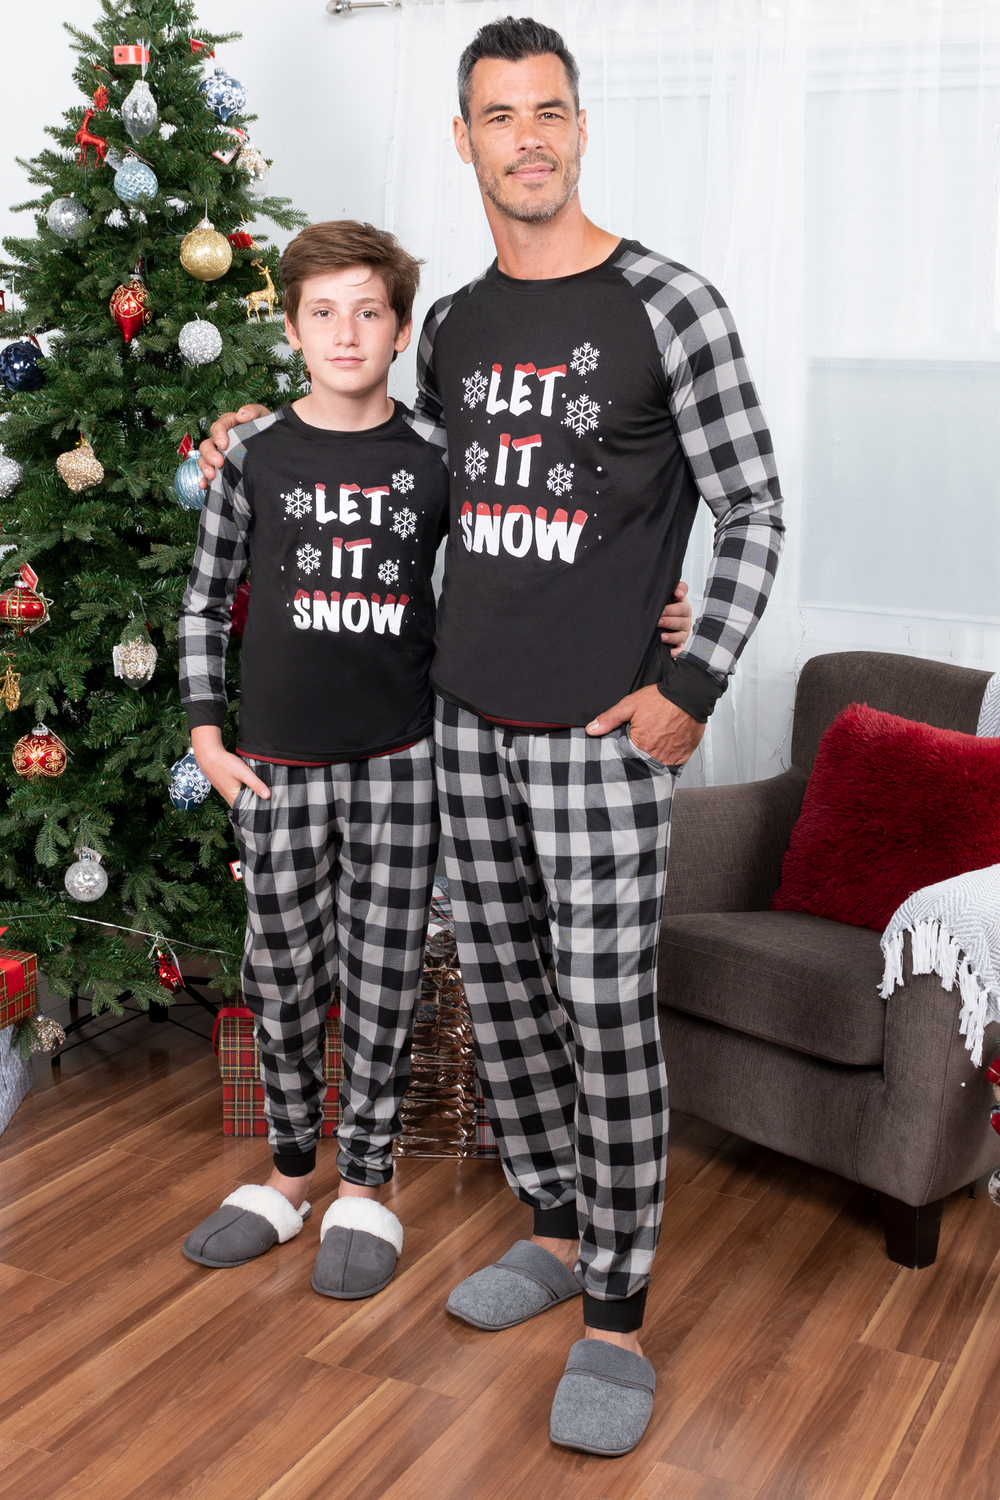 https://www.rossy.ca/media/A2W/products/daddy-me-matching-pj-sets-let-it-snow-79236-1.jpg